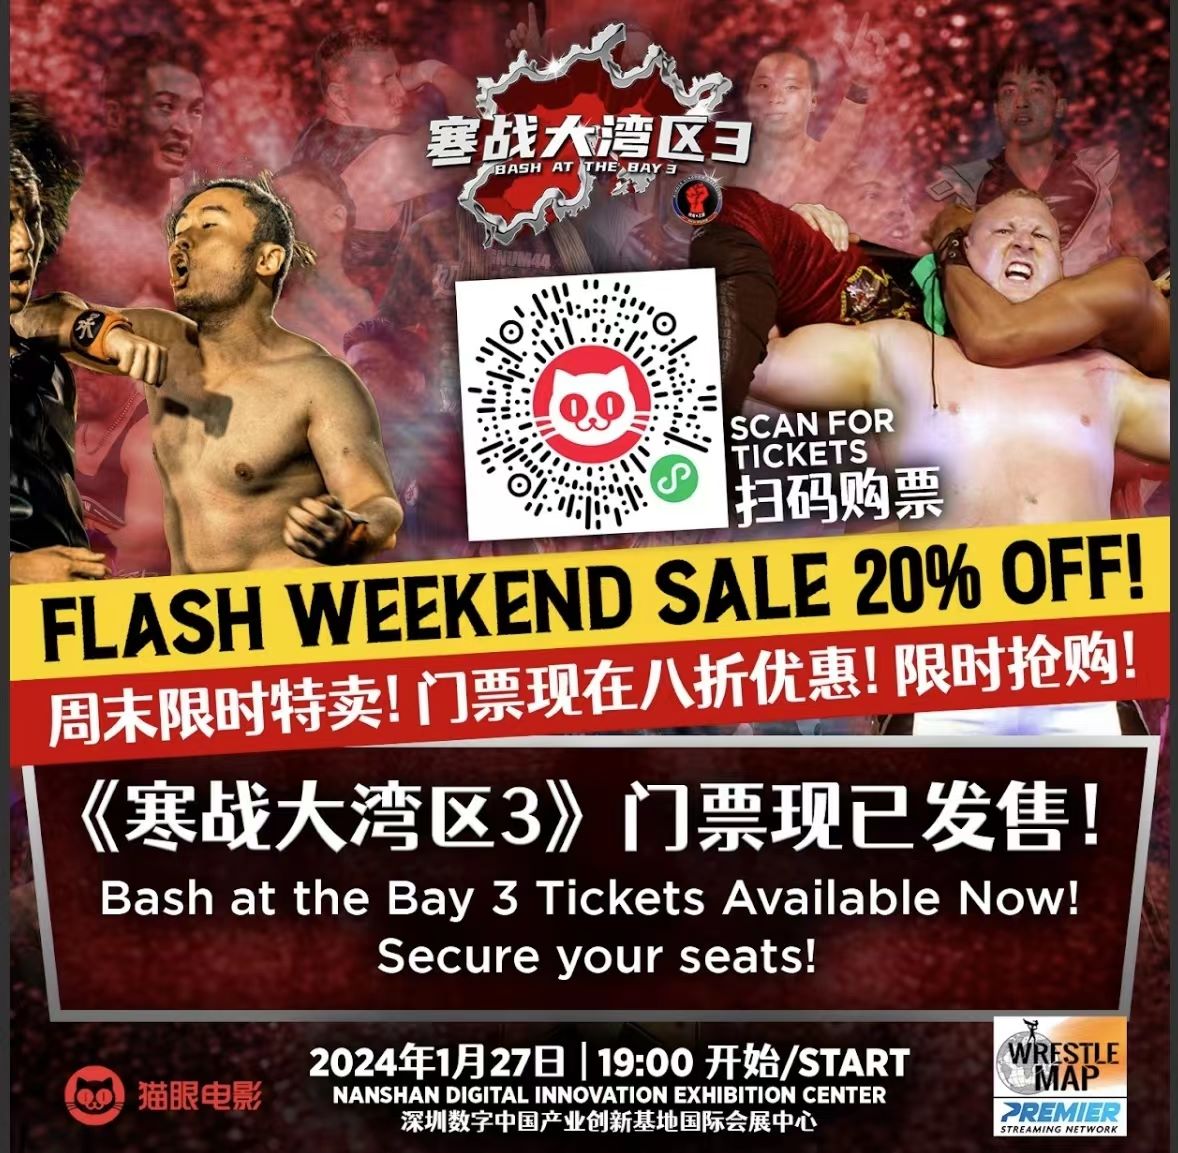 Live Pro Wrestling Returns to GBA with MKW Bash at the Bay 3